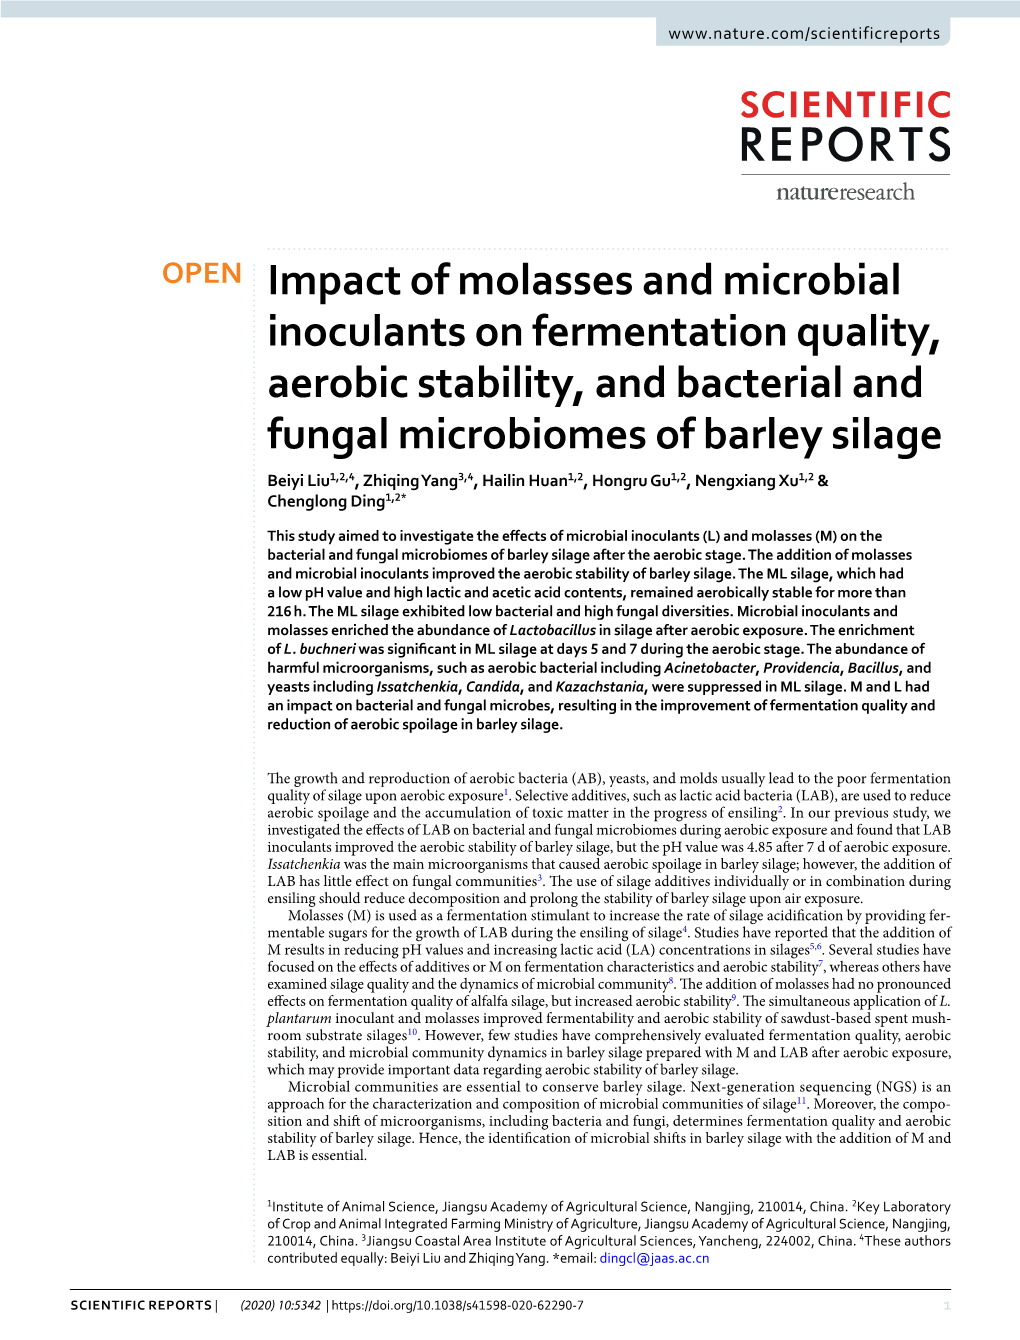 Impact of Molasses and Microbial Inoculants on Fermentation Quality, Aerobic Stability, and Bacterial and Fungal Microbiomes Of